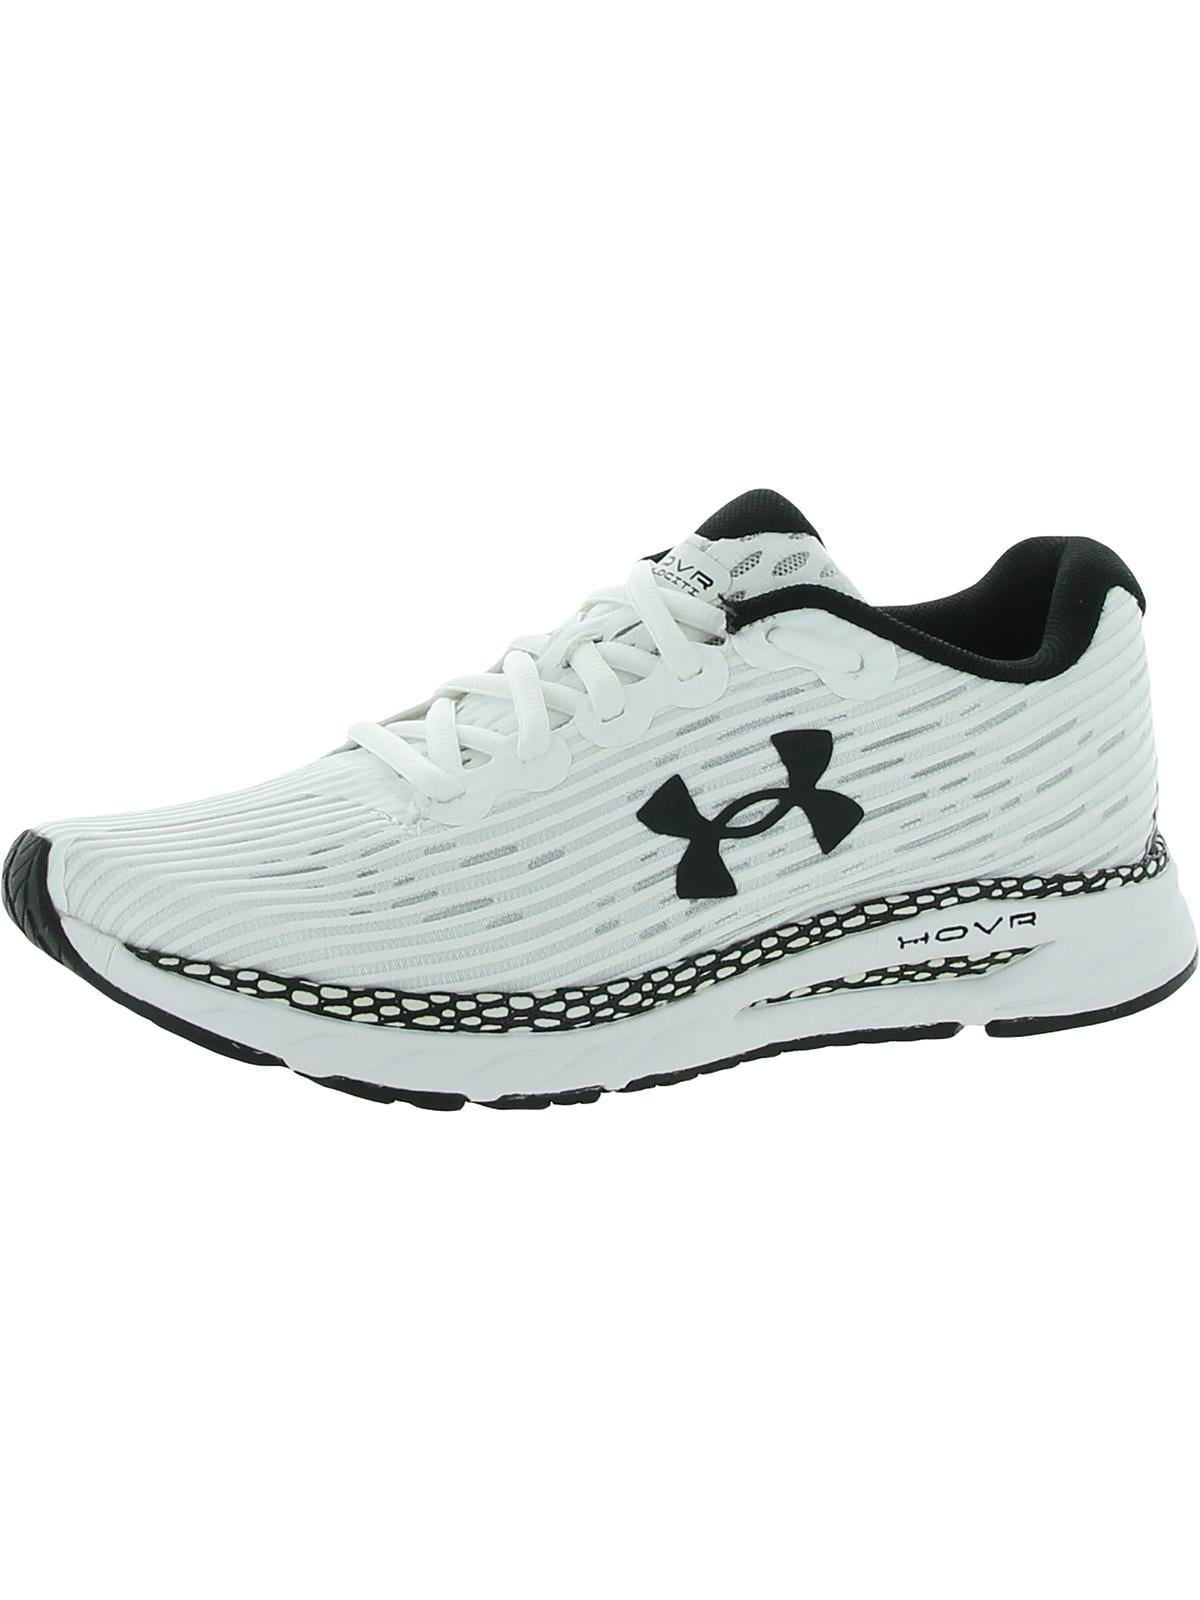 Under Armour Womens Hovr Velociti 3 Bluetooth Smart Shoes White